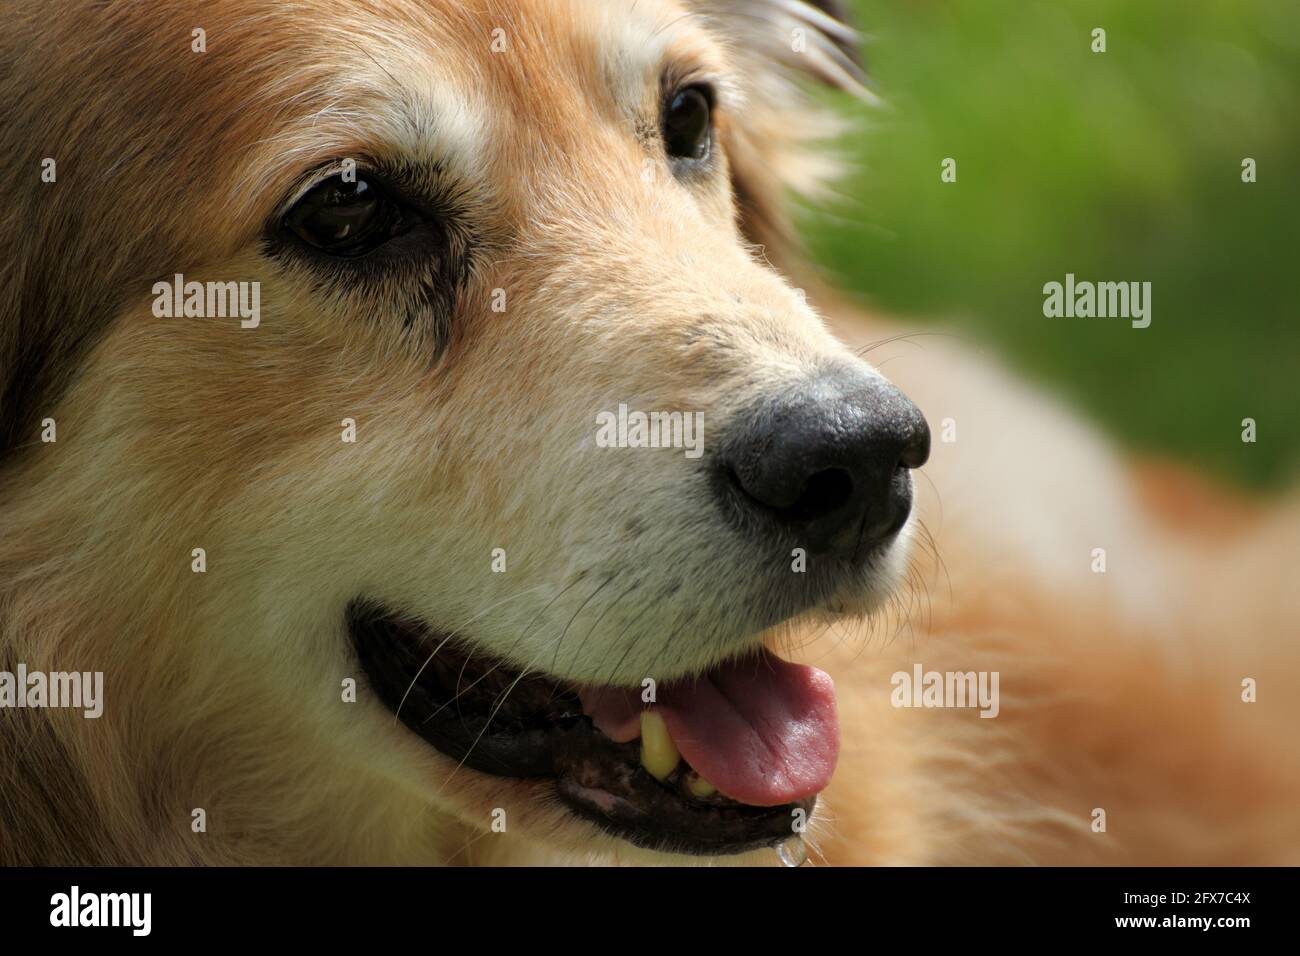 Portrait of a mixed breed dog from Romania, taken from the animal welfare Stock Photo